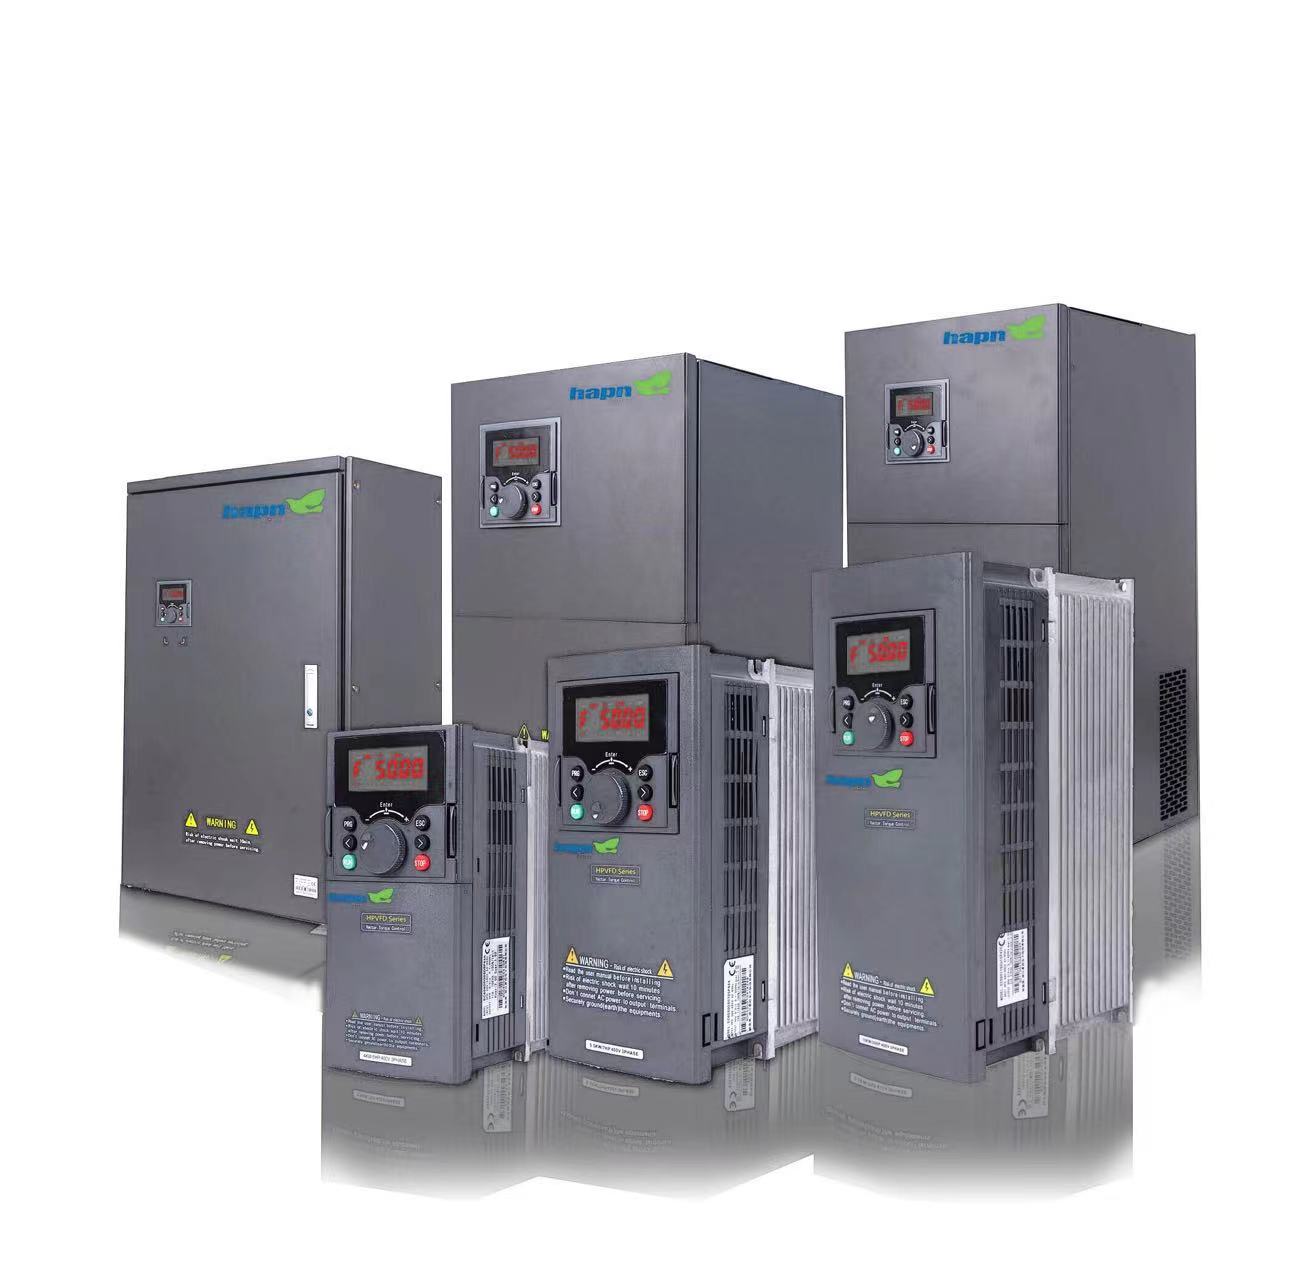 HPVFD low voltage frequency inverter